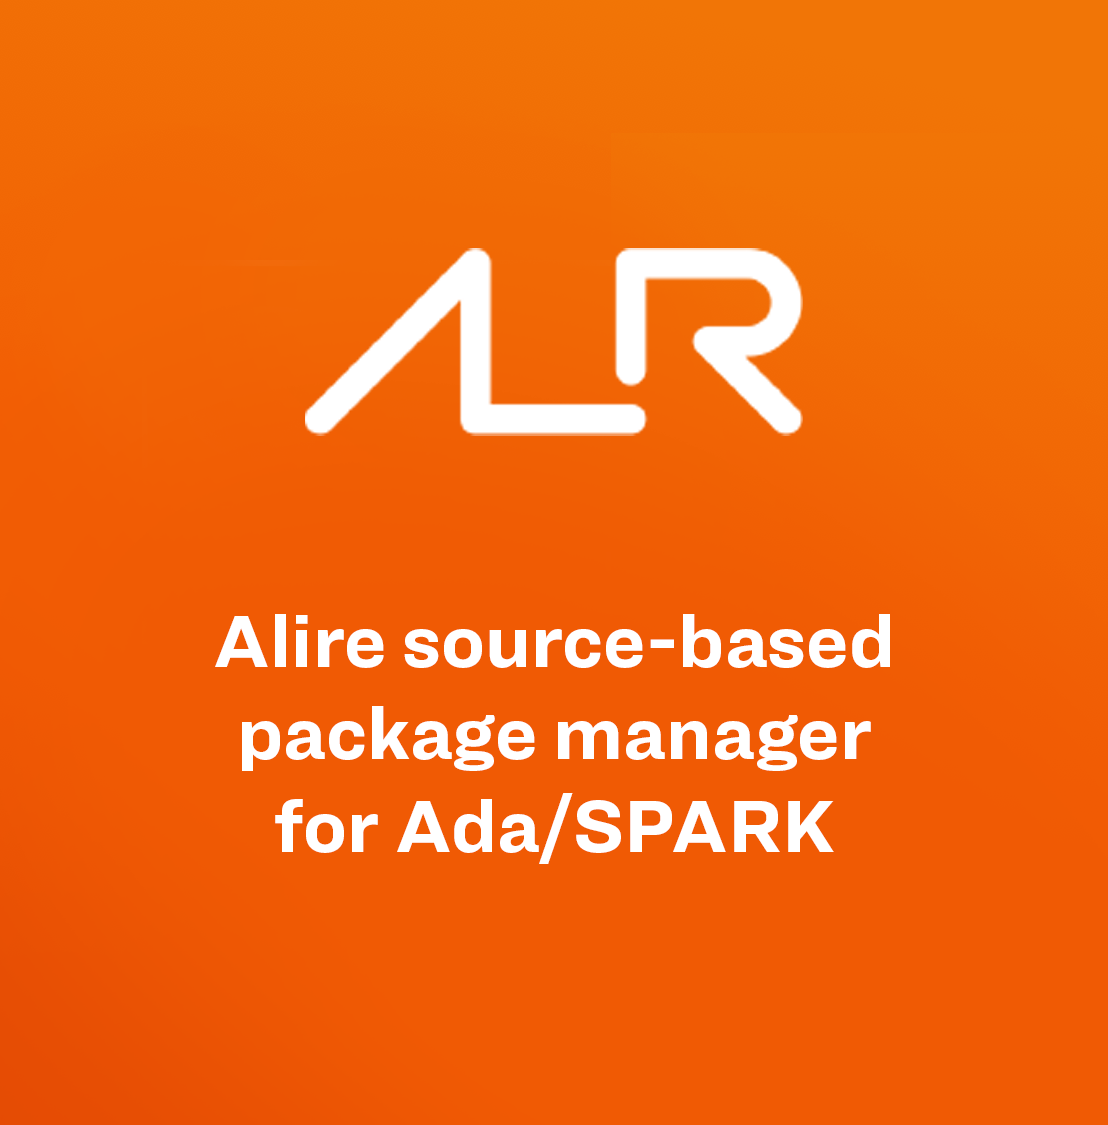 Alire package manager